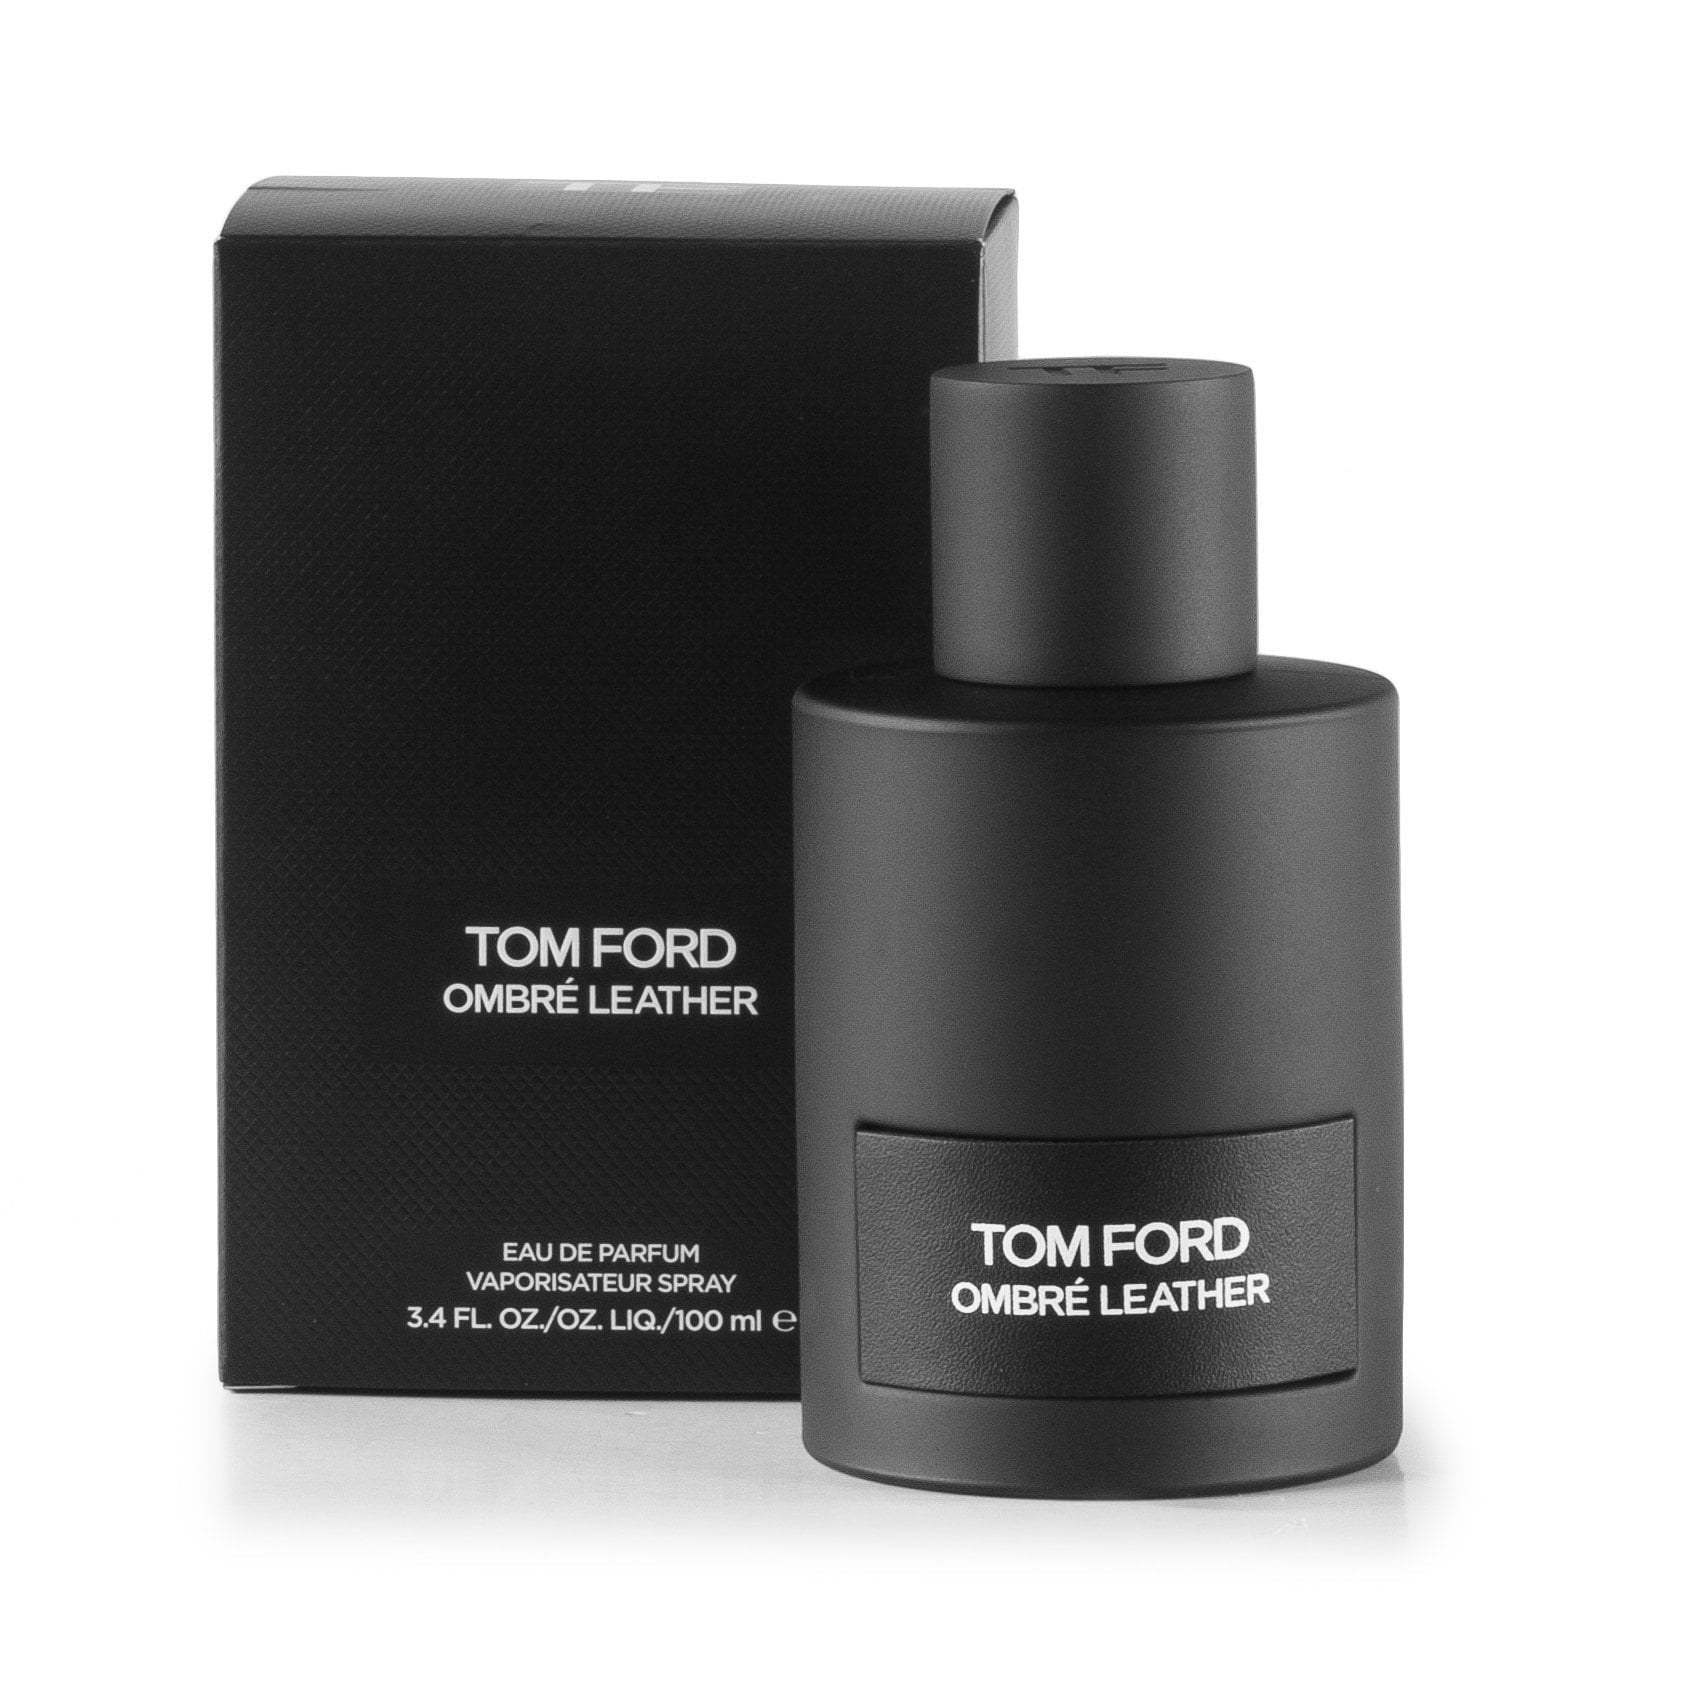 Ombre Leather Eau de Parfum Spray for Men by Tom Ford, Product image 1